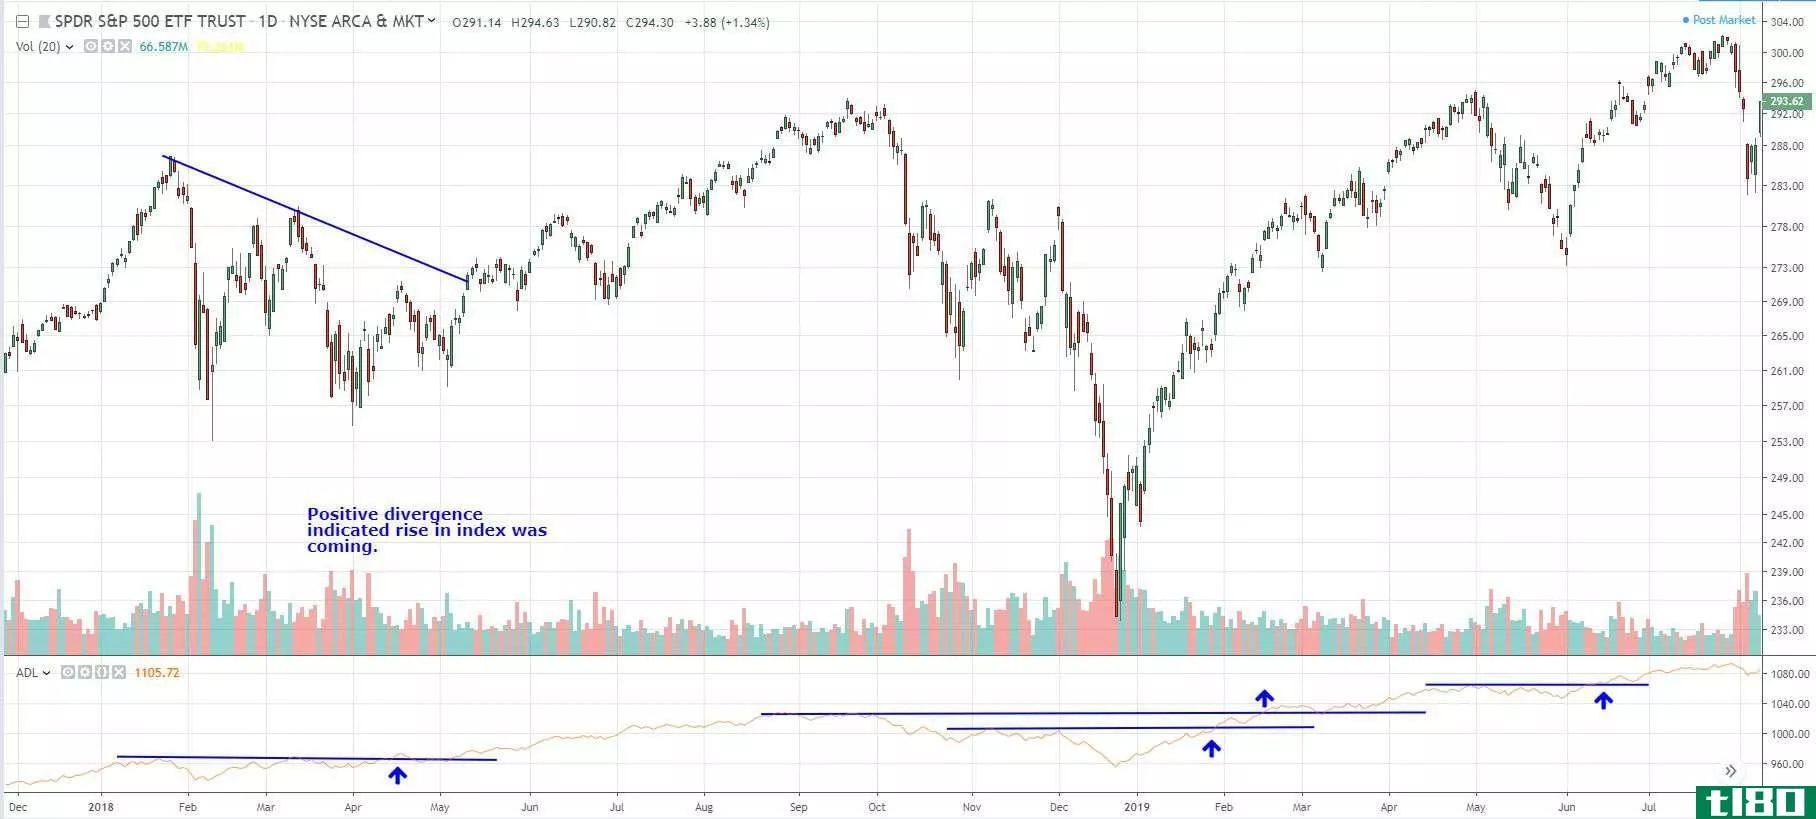 breadth of market theory example with NYSE AD line and SPY